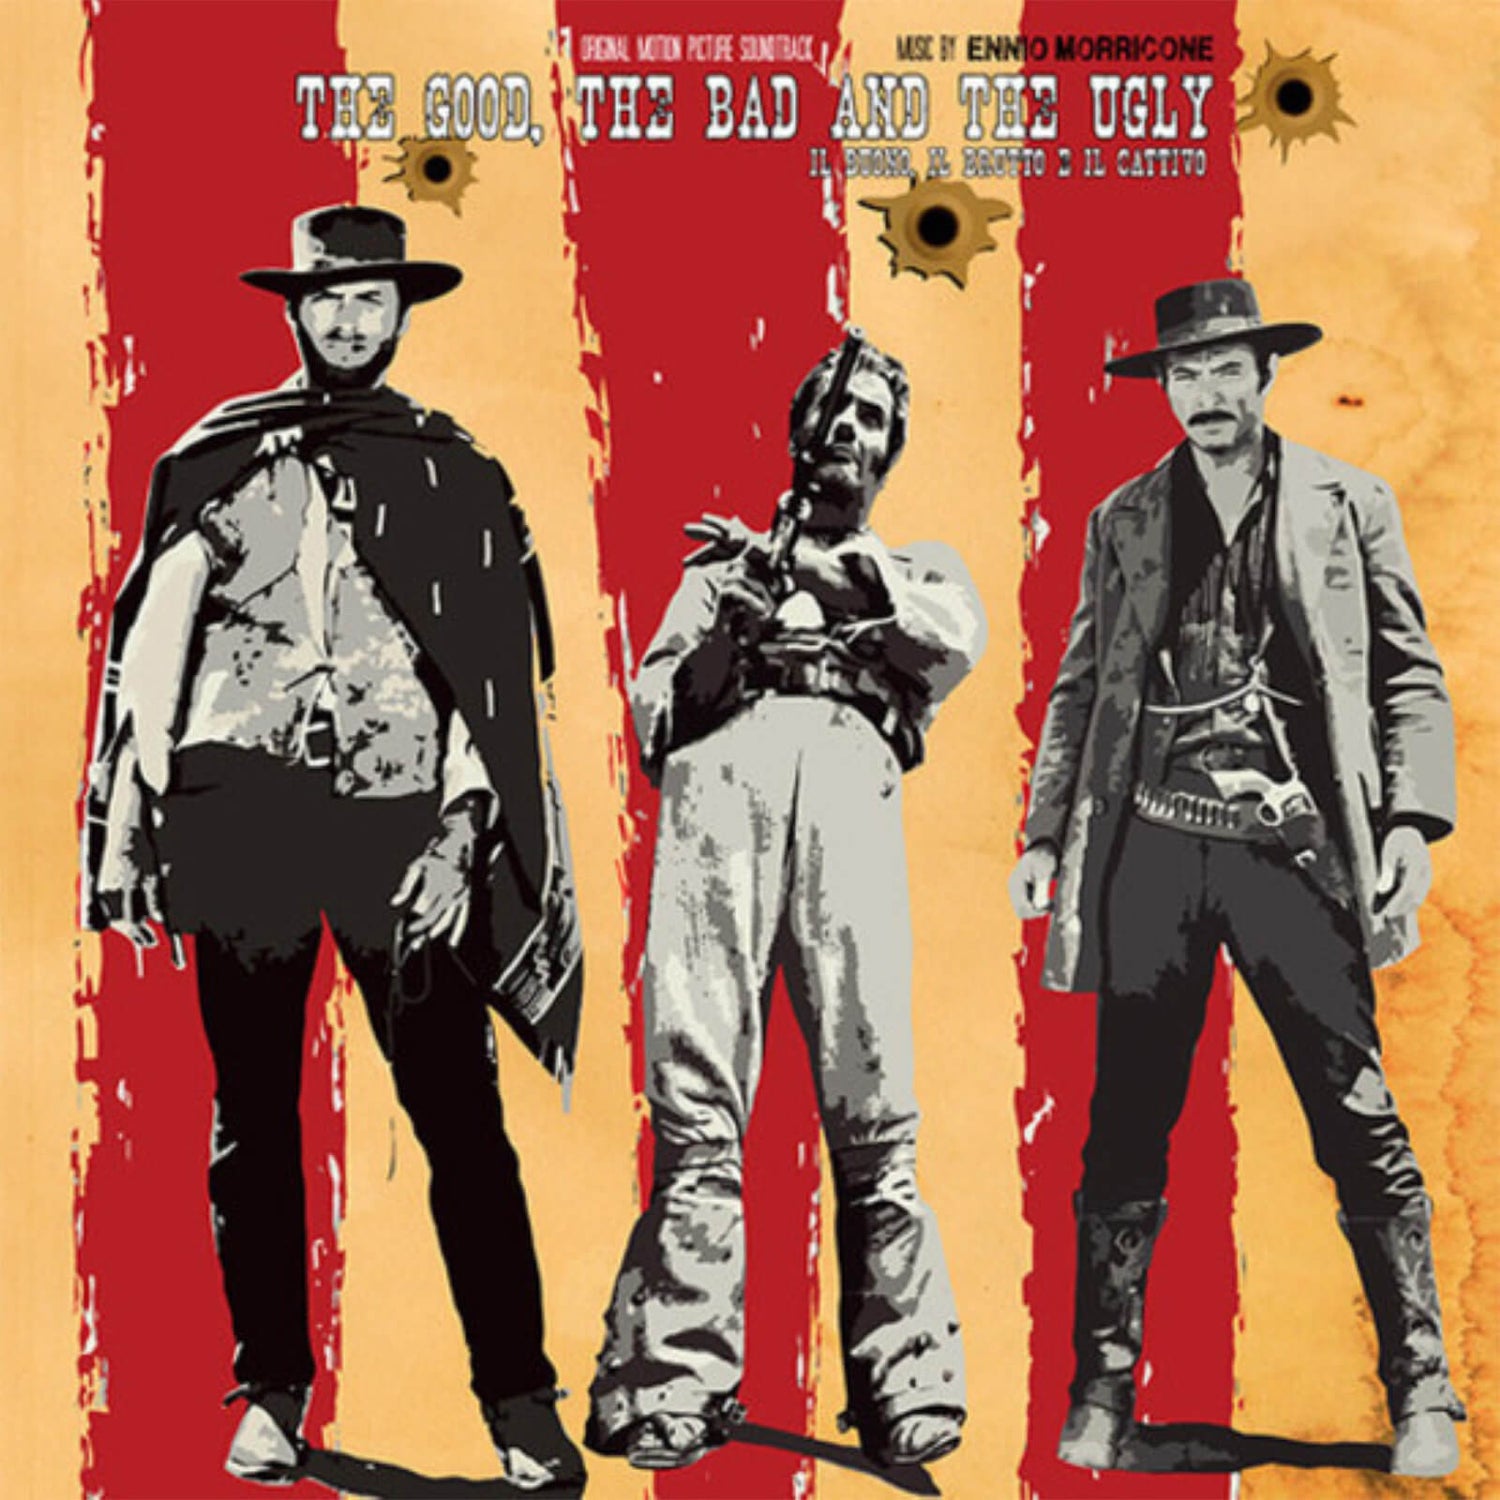 The Good, The Bad And The Ugly (Original Motion Picture Soundtrack) Vinyl (Clear)